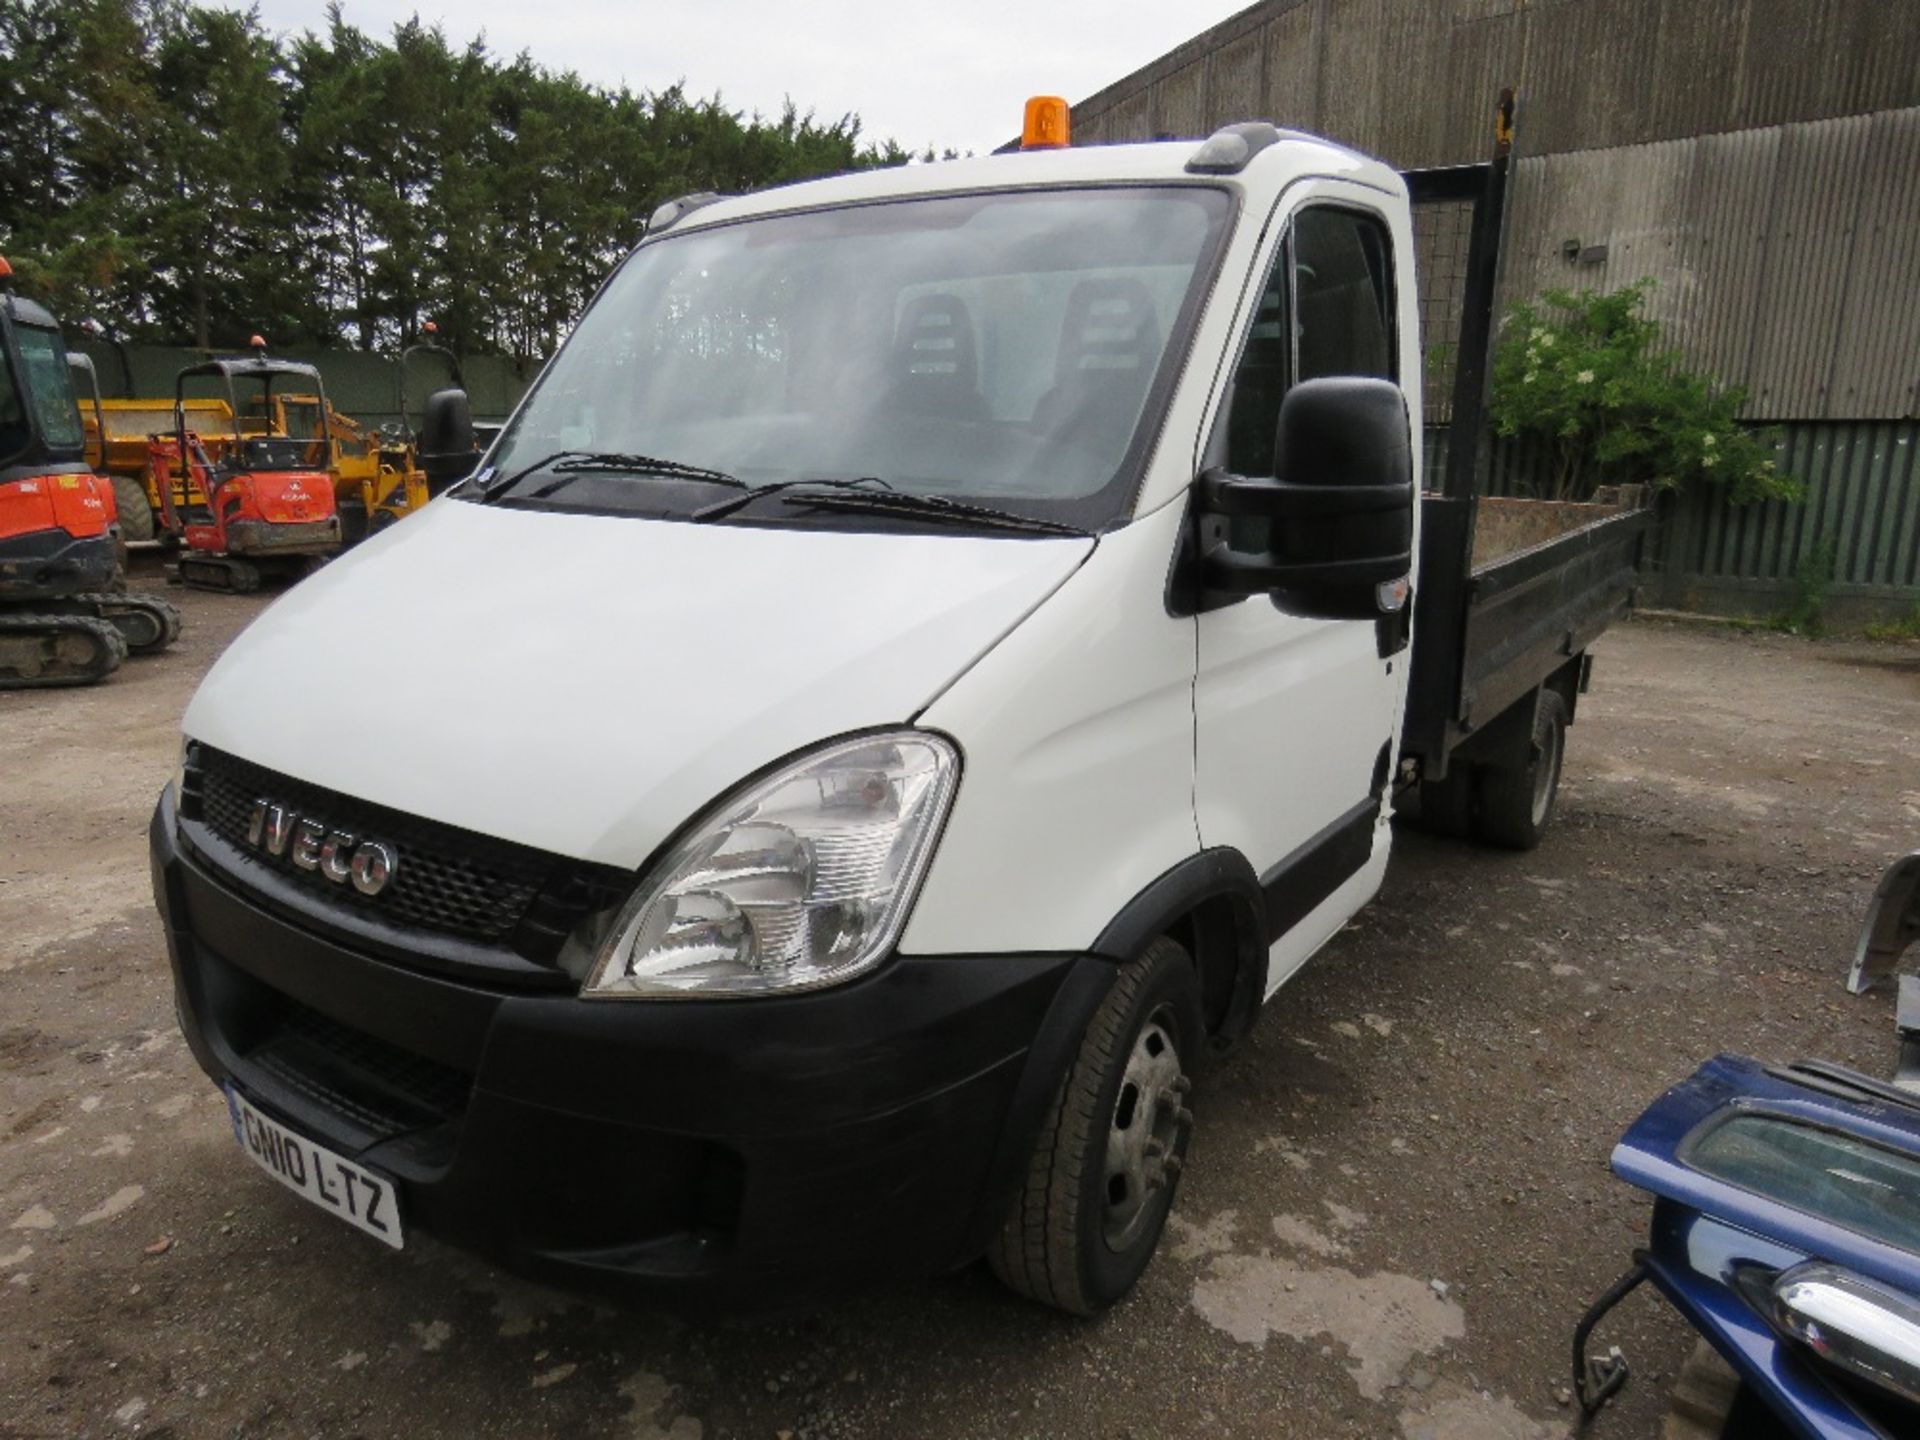 IVECO 35C11 TIPPER TRUCK. REG:GN10 LTZ, LONG TEST, KEY HAS BEEN PREVIOUSLY BROKEN BUT FUNCTIONAL. - Image 9 of 11